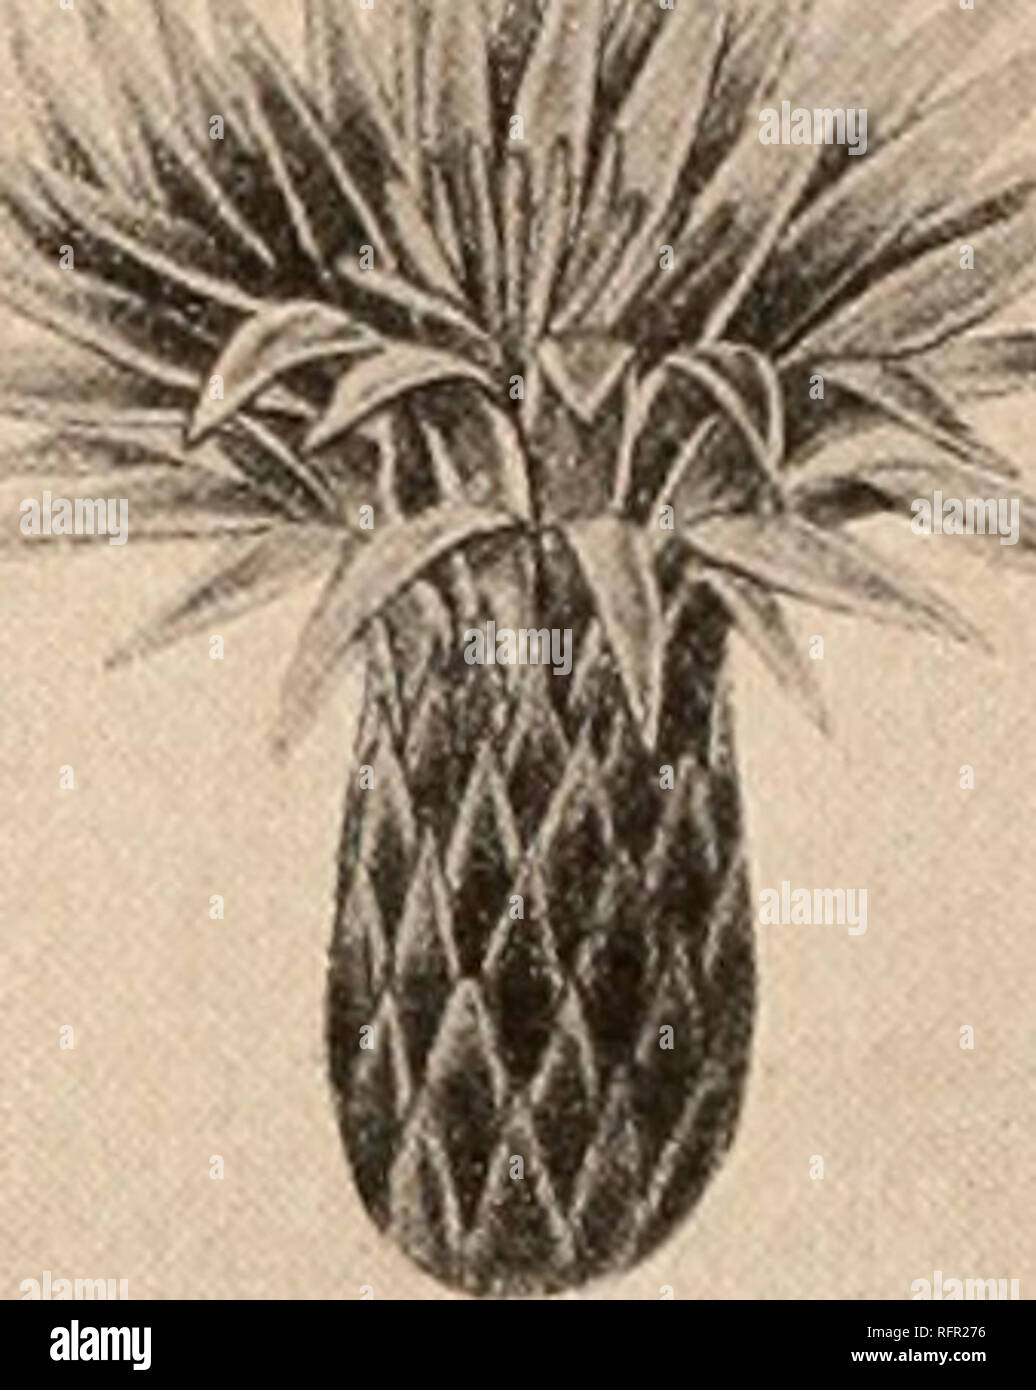 . Carnegie Institution of Washington publication. . Fig. 149.—Ferocactus johnsonii. Fig. 150.—Ferocactus nobilis. We have referred here the synonymy given by Schumann, but suspect some of it should be referred elsewhere. Our description is based on Miller's original of Cactus recurvus for the stem and spines and on Pfeiffer's original description of Echinocactus spiralis for the flower and fruit. Schumann's description is somewhat different. Echinocactus spiralis stellaris Salm-Dyck (Cact. Hort. Dyck. 1844. 21. 1845), Echino- cactus stellaris Karwinsky, also mentioned here by Salm-Dyck as a sy Stock Photo